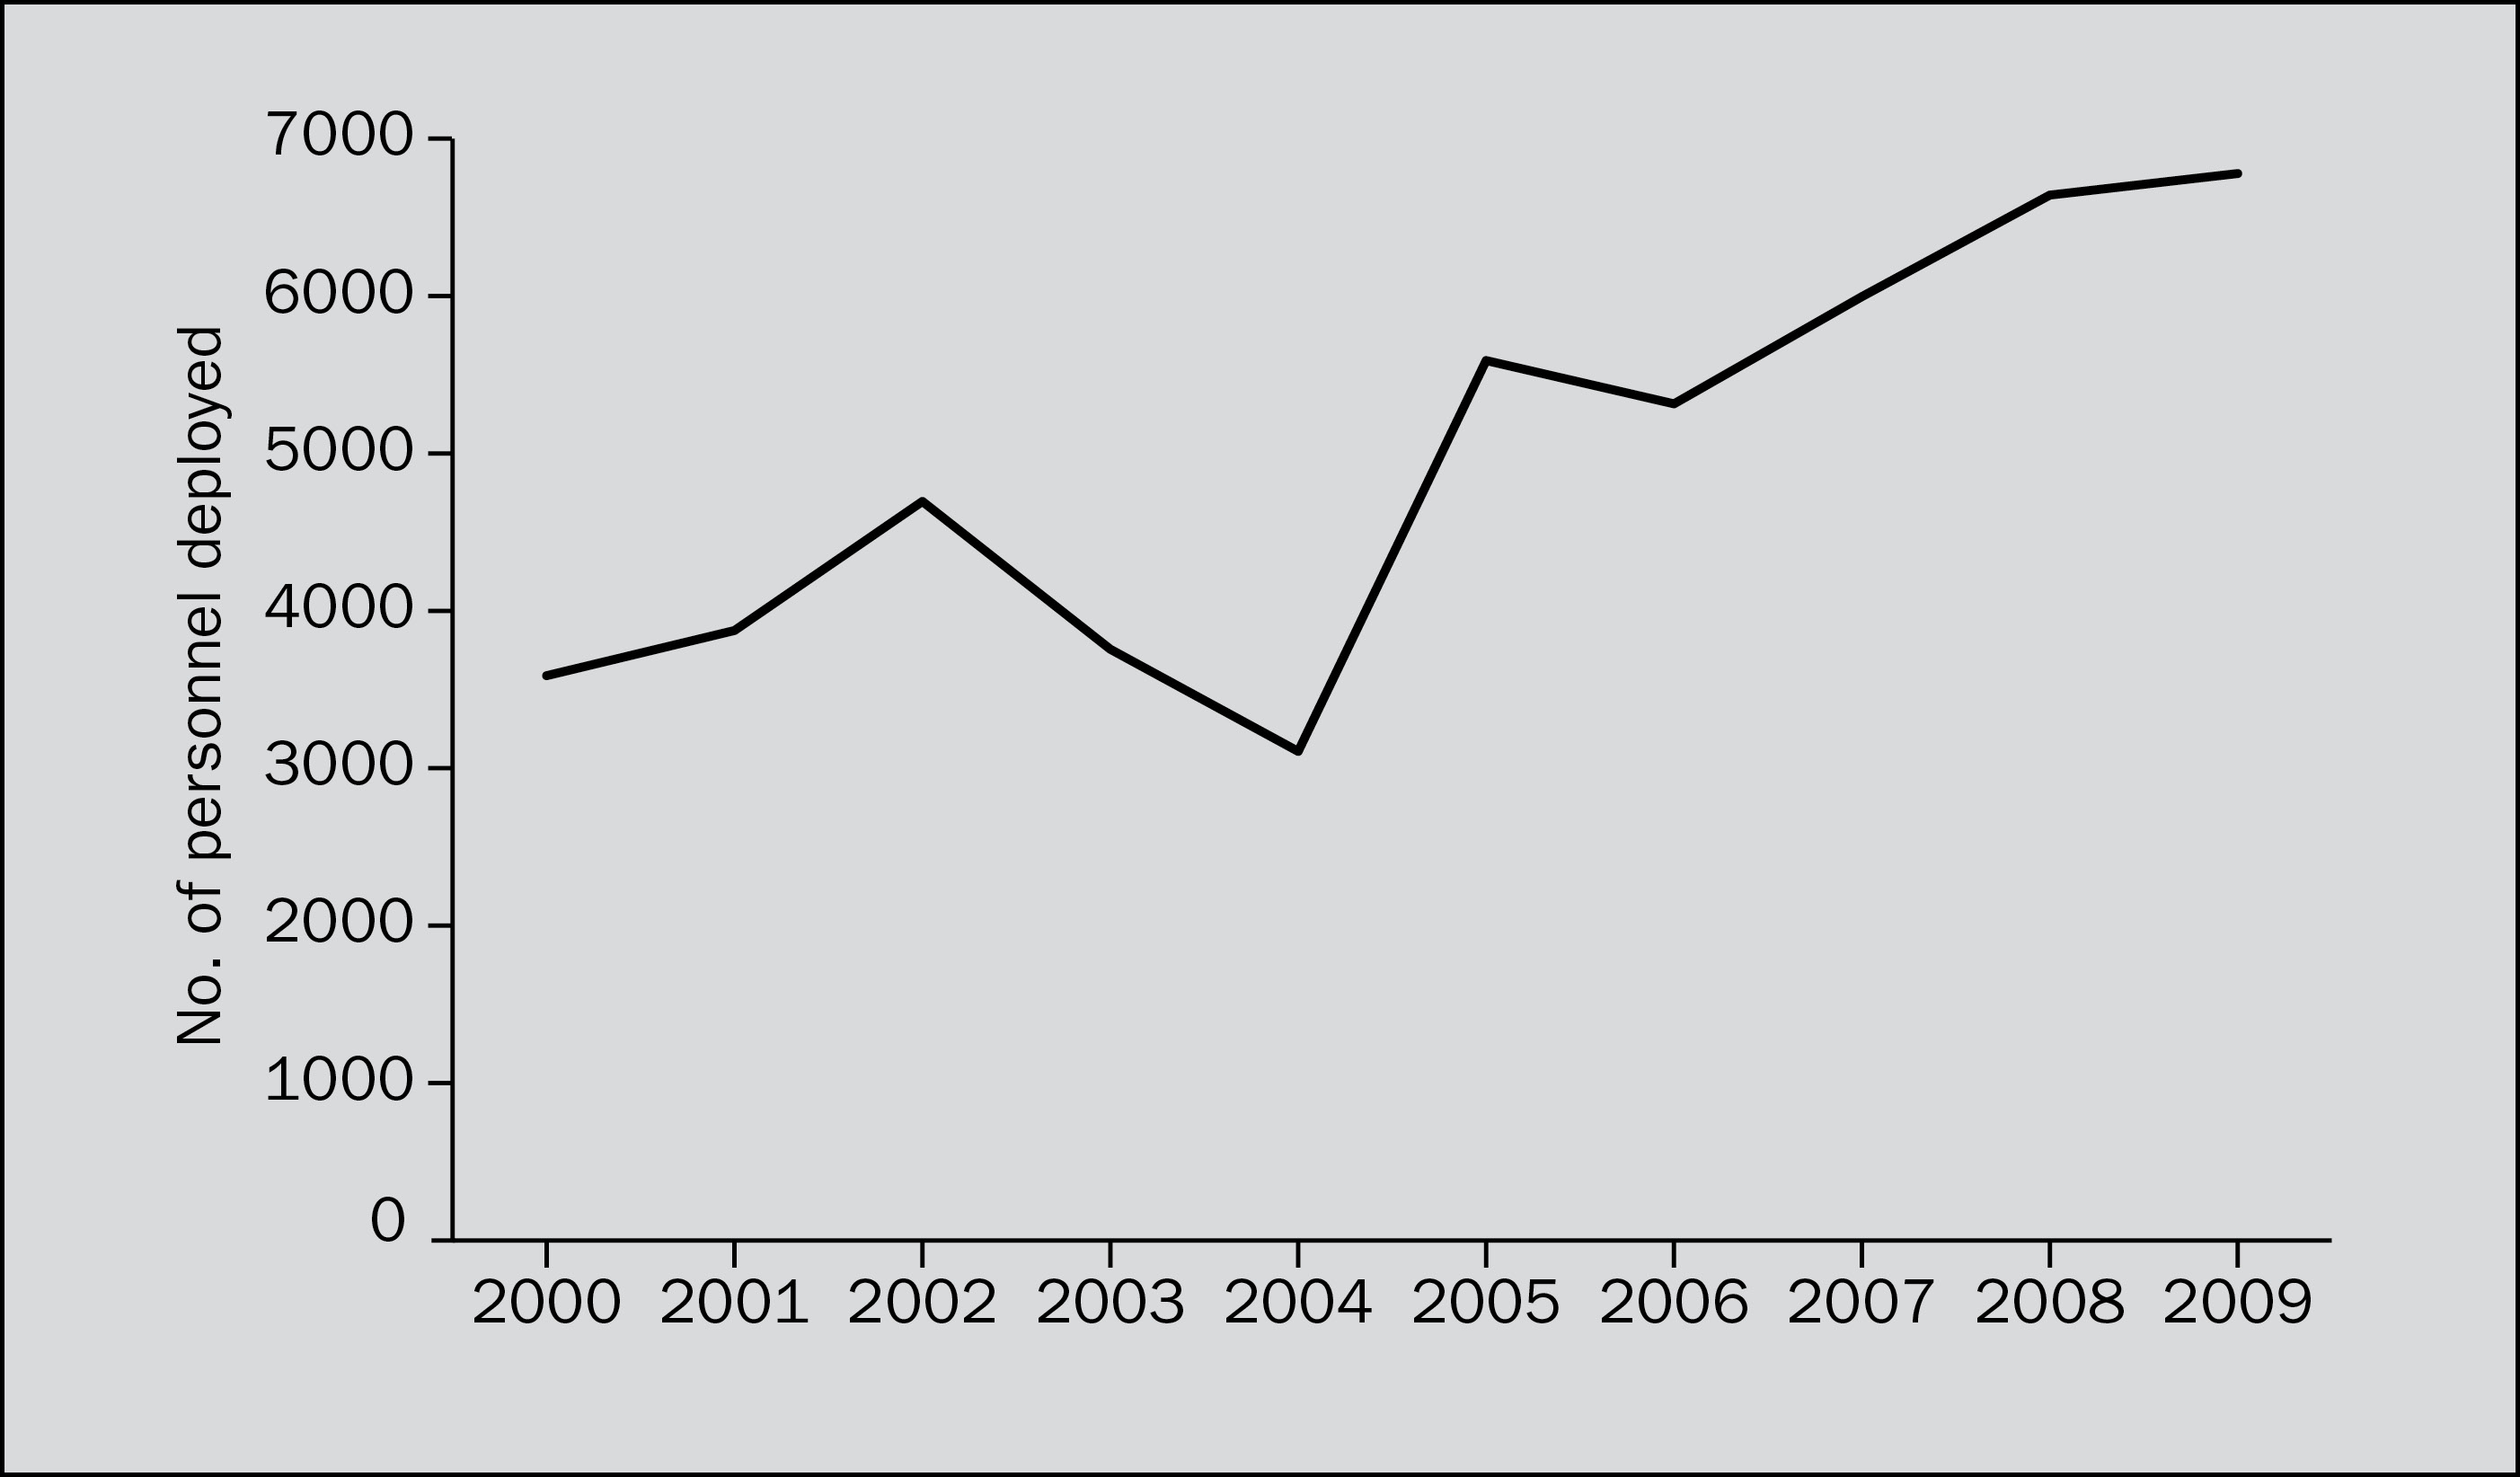 Civilians deployed to peace operations, 2000–2009